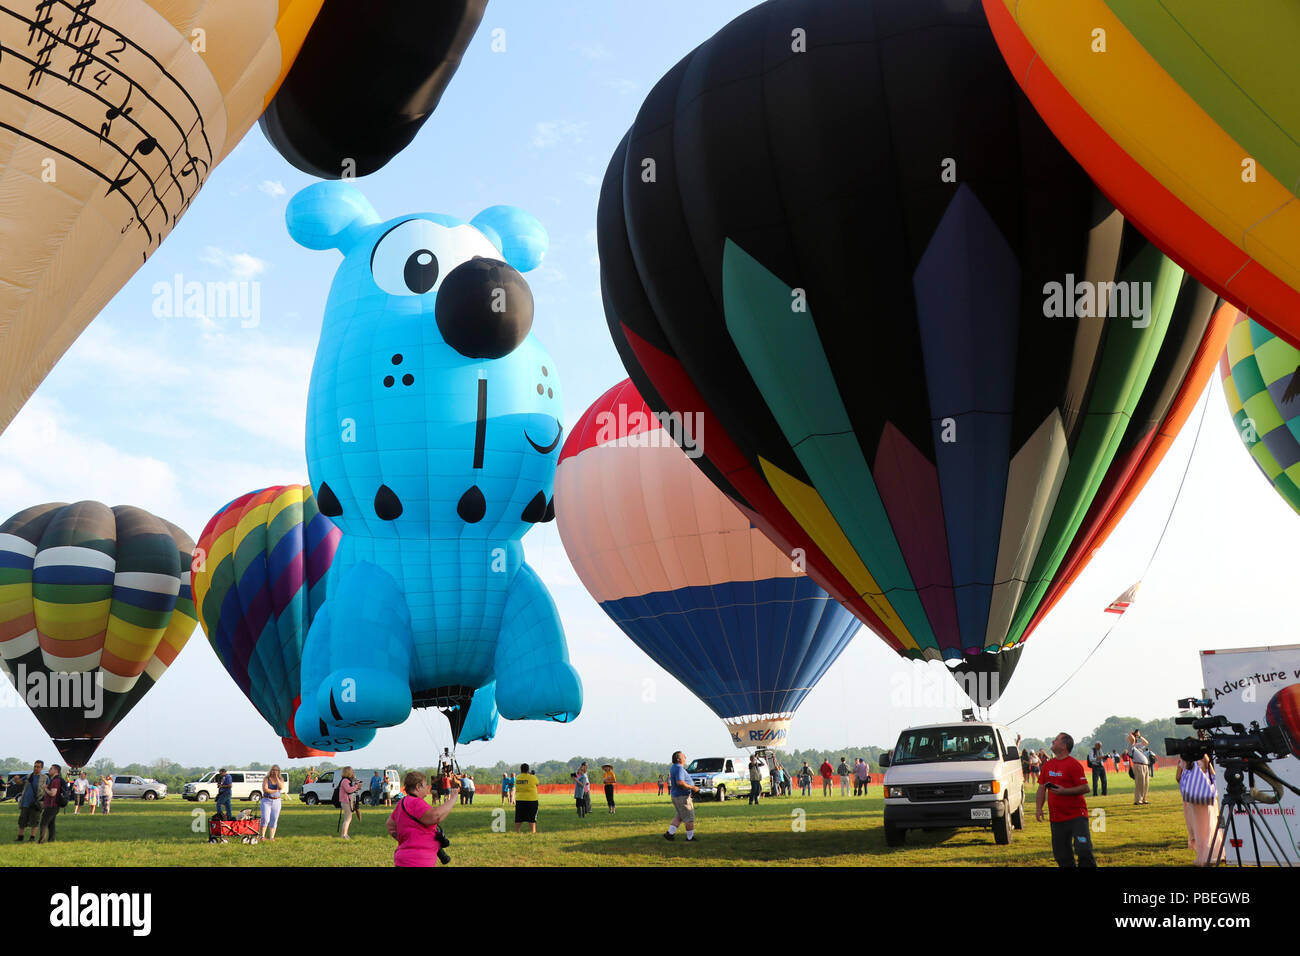 New Jersey, USA. 28th July, 2018. Balloons are seen during the media preview of the 36th Quickcheck New Jersey Festival of Ballooning in Readington of New Jersey, the United States, July 27, 2018. The three-day festival which kicked off on Friday, features mass inflation and ascension of up to 100 hot air balloons during the weekend, expected to attract 165,000 people. Credit: Xinhua/Alamy Live News Stock Photo